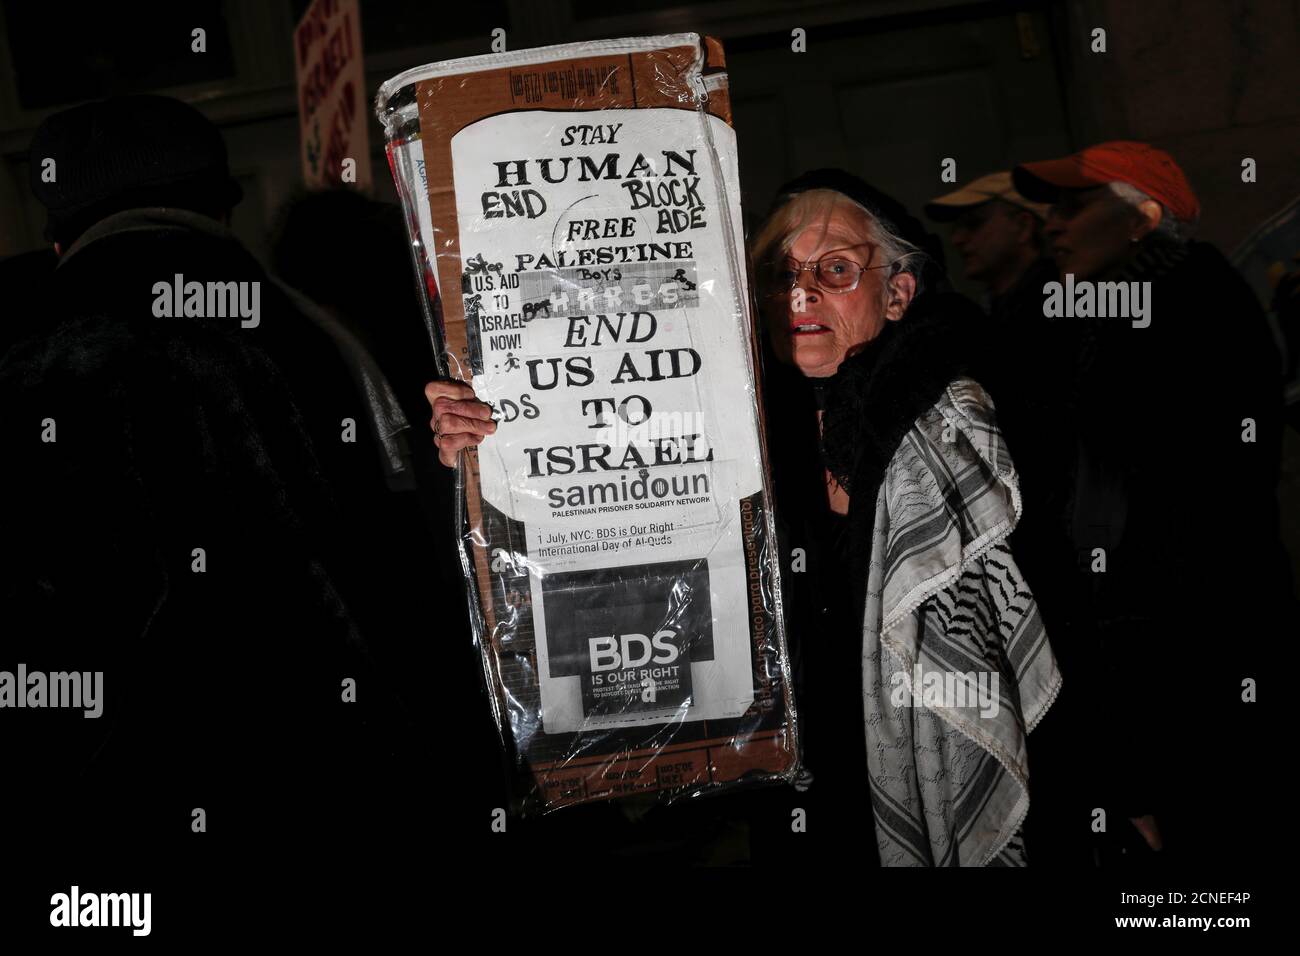 A woman holds a sign during a 'Muslim and Jewish Solidarity' demonstration protesting the policies of U.S. President Donald Trump and Israeli Prime Minister Benjamin Netanyahu at Grand Central Terminal in New York City, U.S., February 15, 2017. REUTERS/Mike Segar Stock Photo